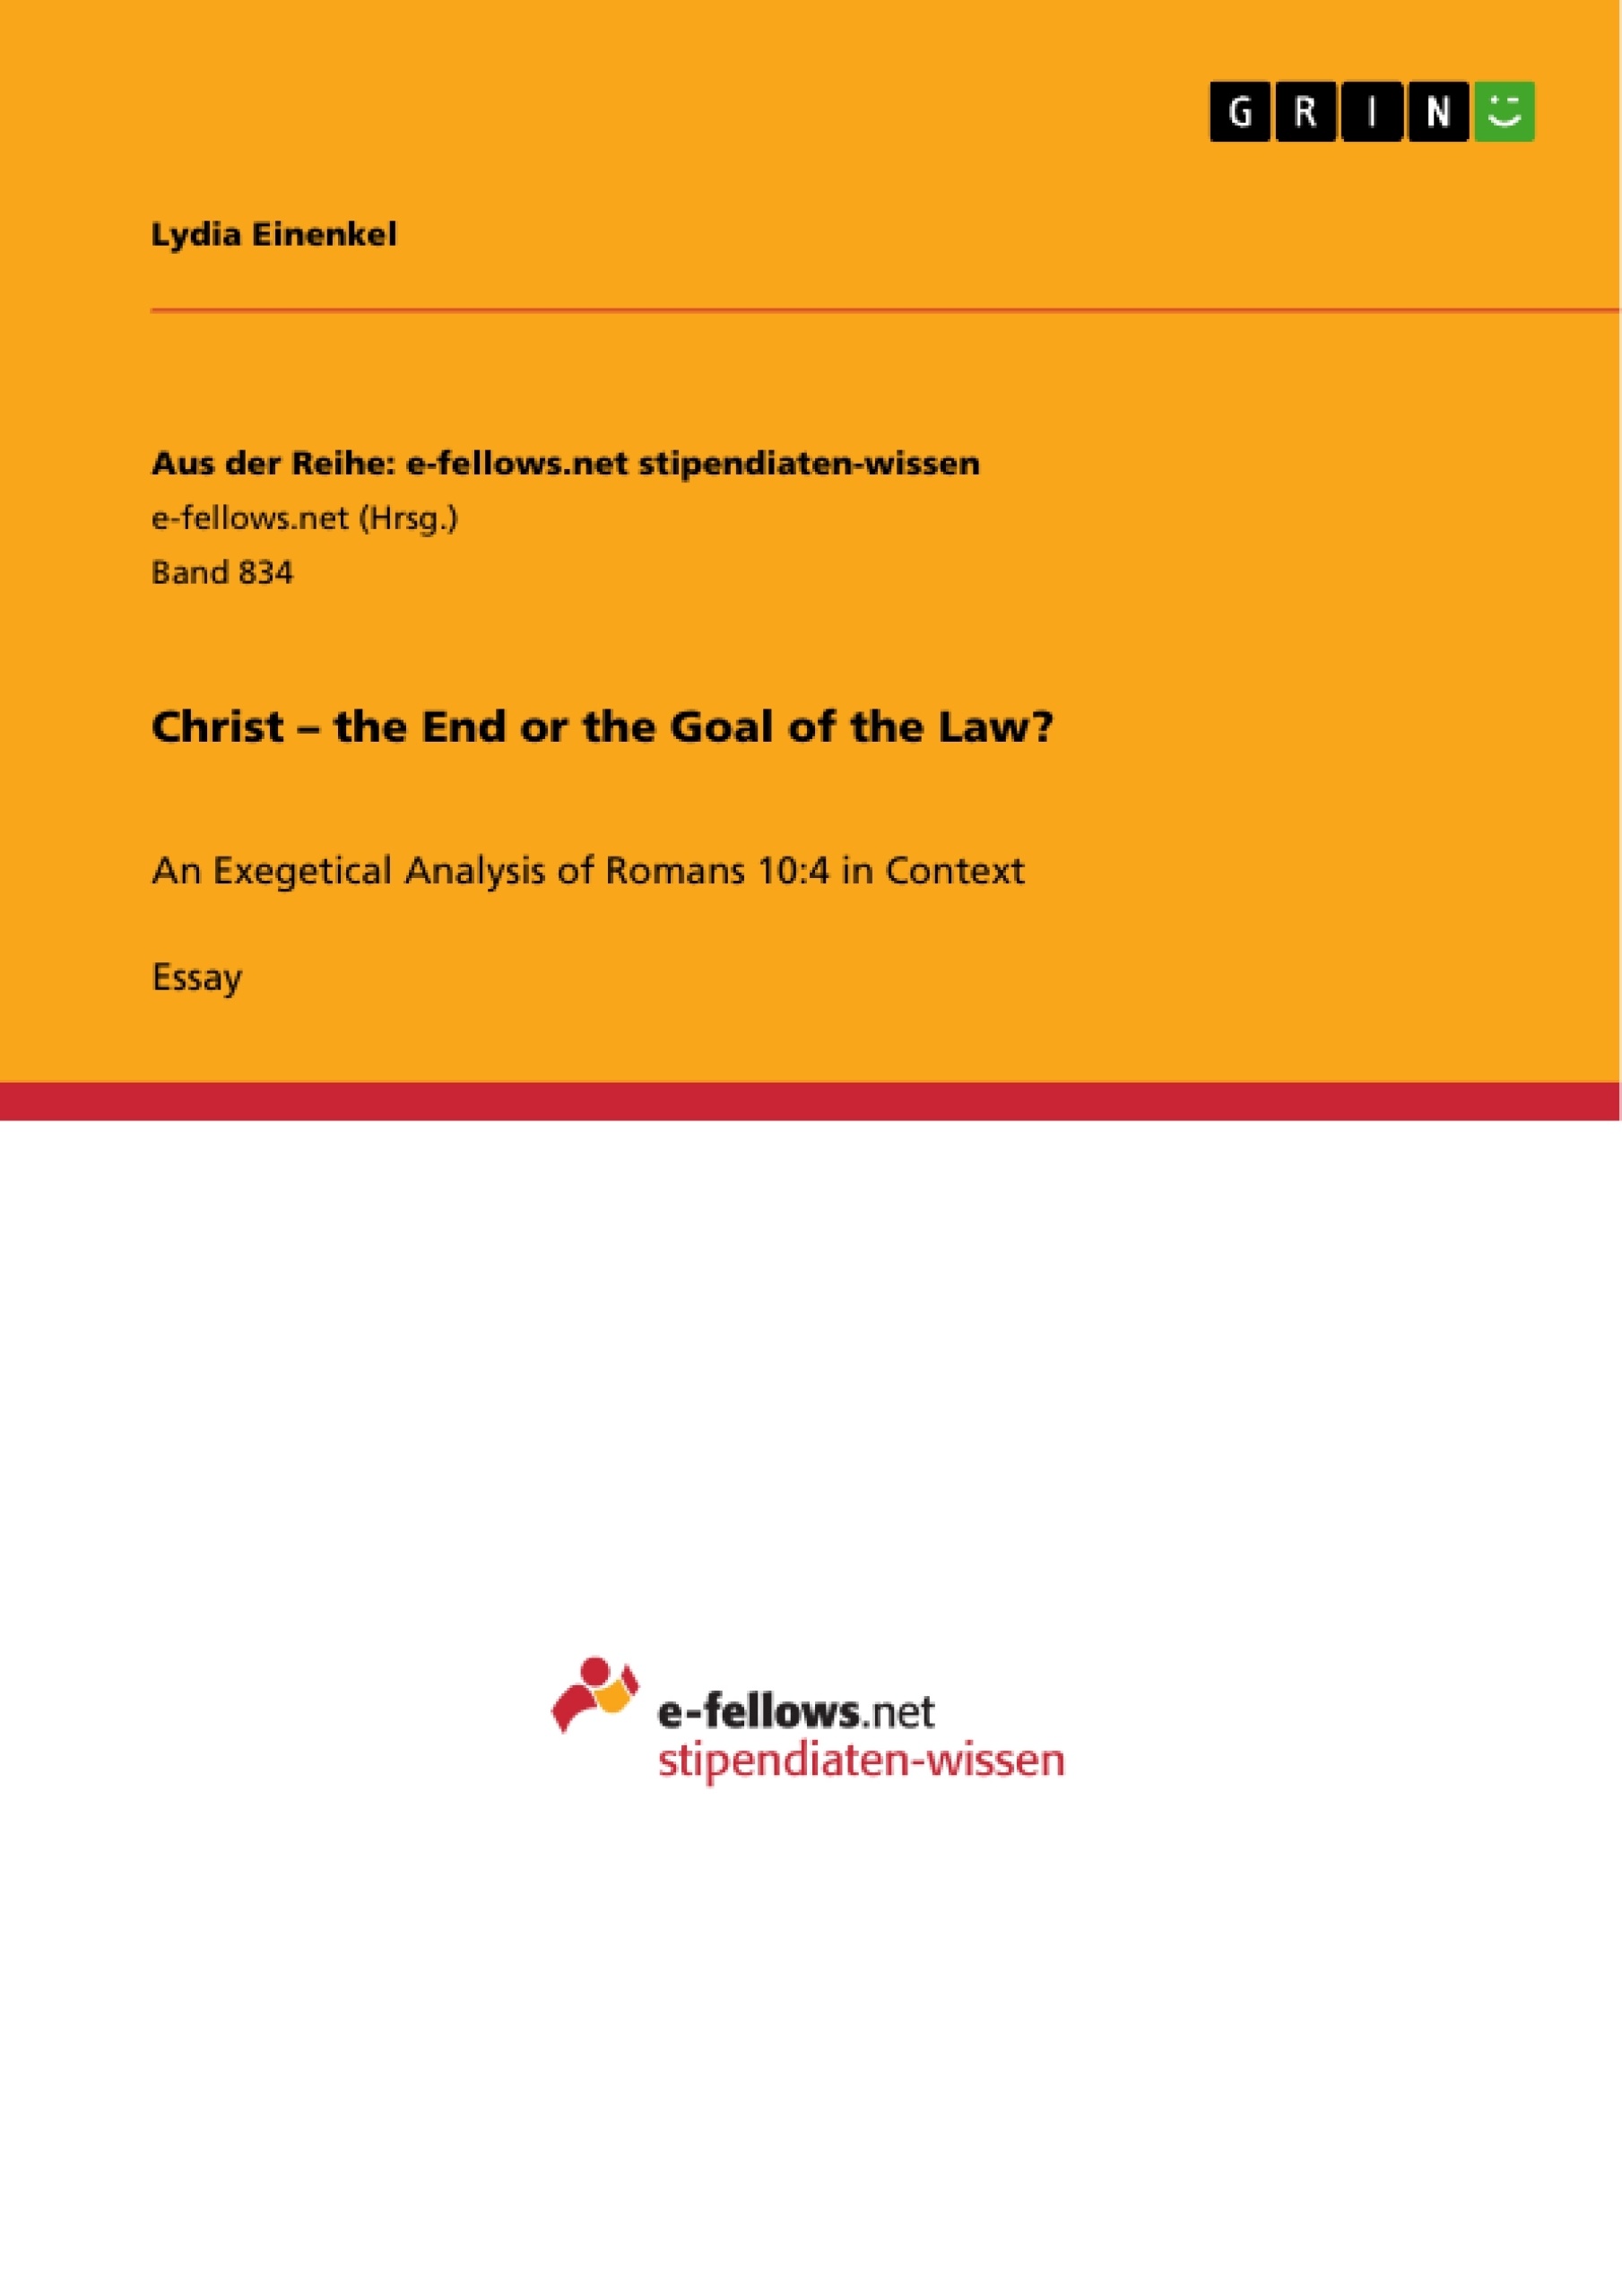 Title: Christ – the End or the Goal of the Law?